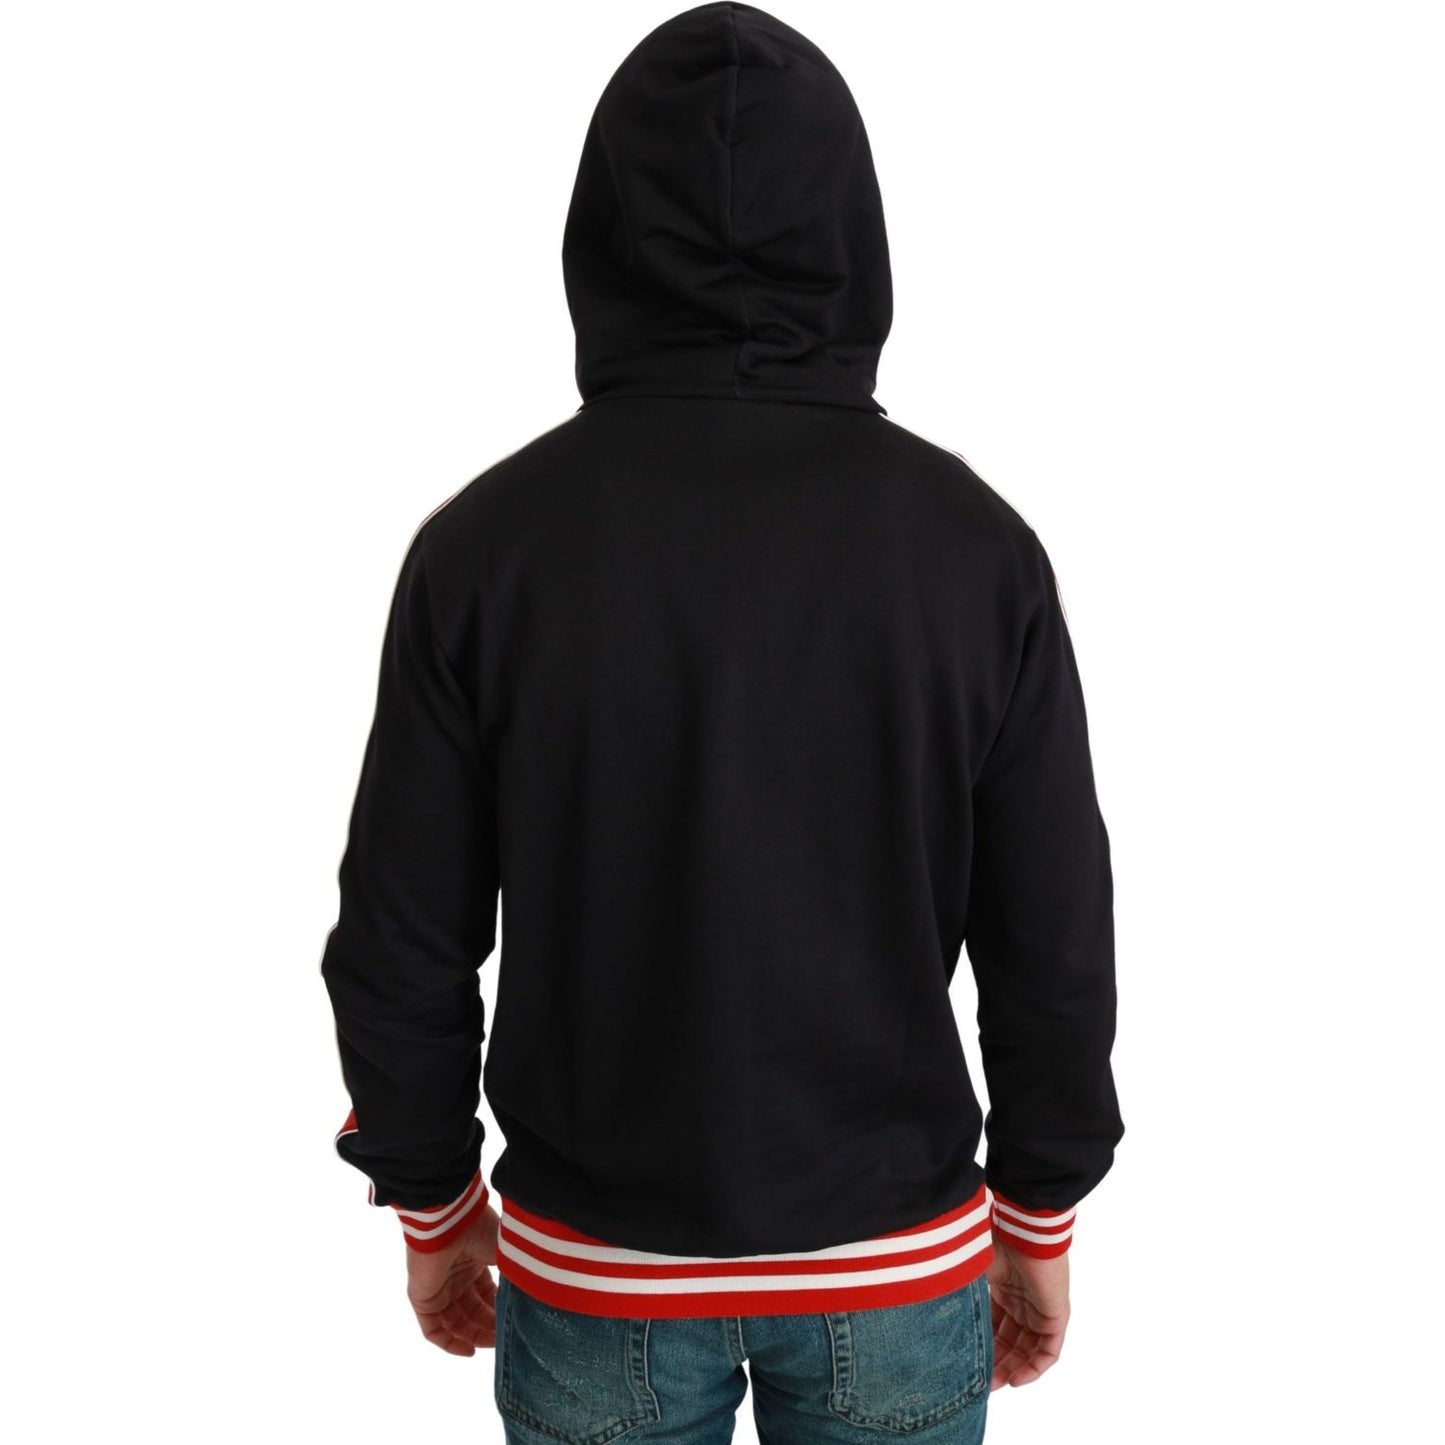 Dolce & Gabbana Elegant Black Hooded Sweater with Multicolor Motif black-pig-of-the-year-hooded-sweater